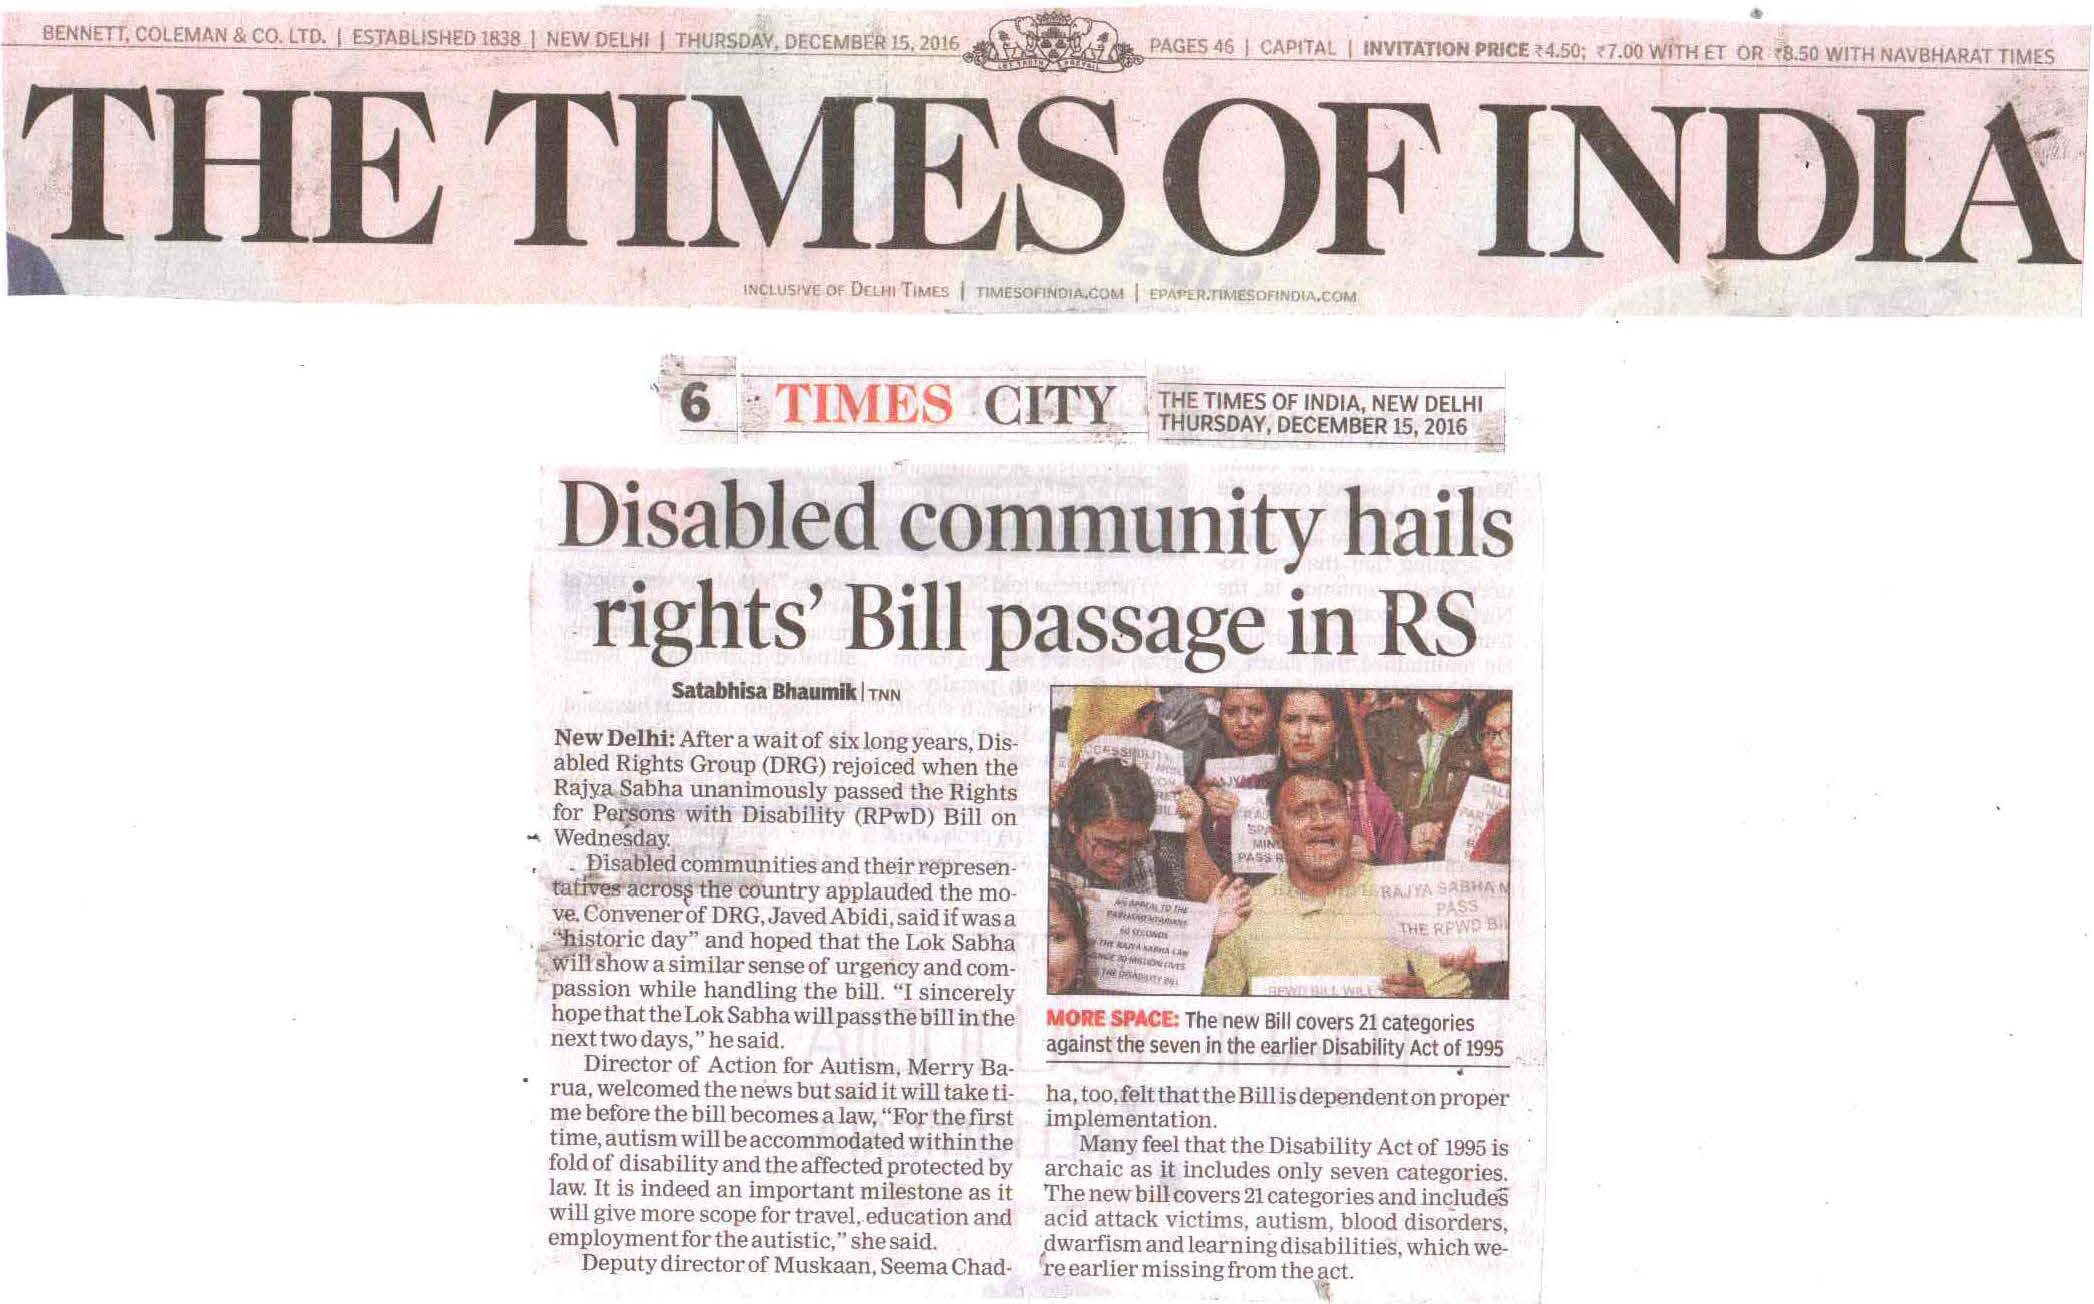 Disabled community hails rights